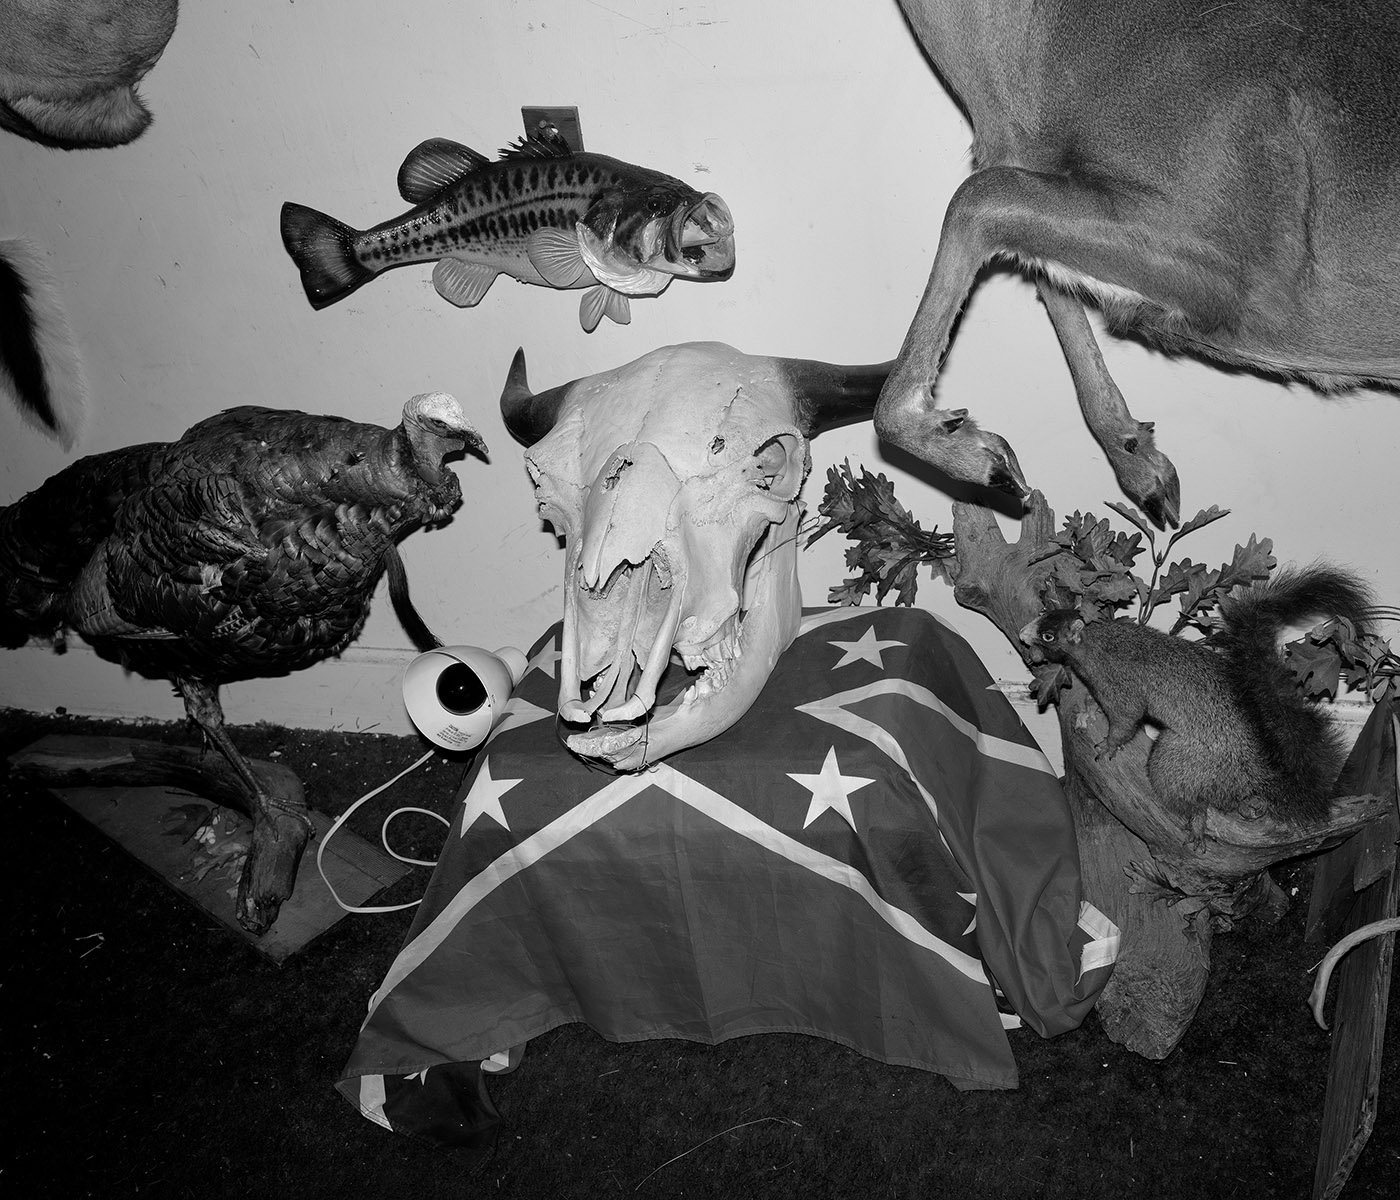   Jacksonville, Calhoun County, Ala. Taxidermy tableaux.   Archival Pigment Print Image: 2020 / Printed: 2022 15 x 17  1/2 in (image size) Edition: 1/10 The Do Good Fund, Inc., 2022-010 